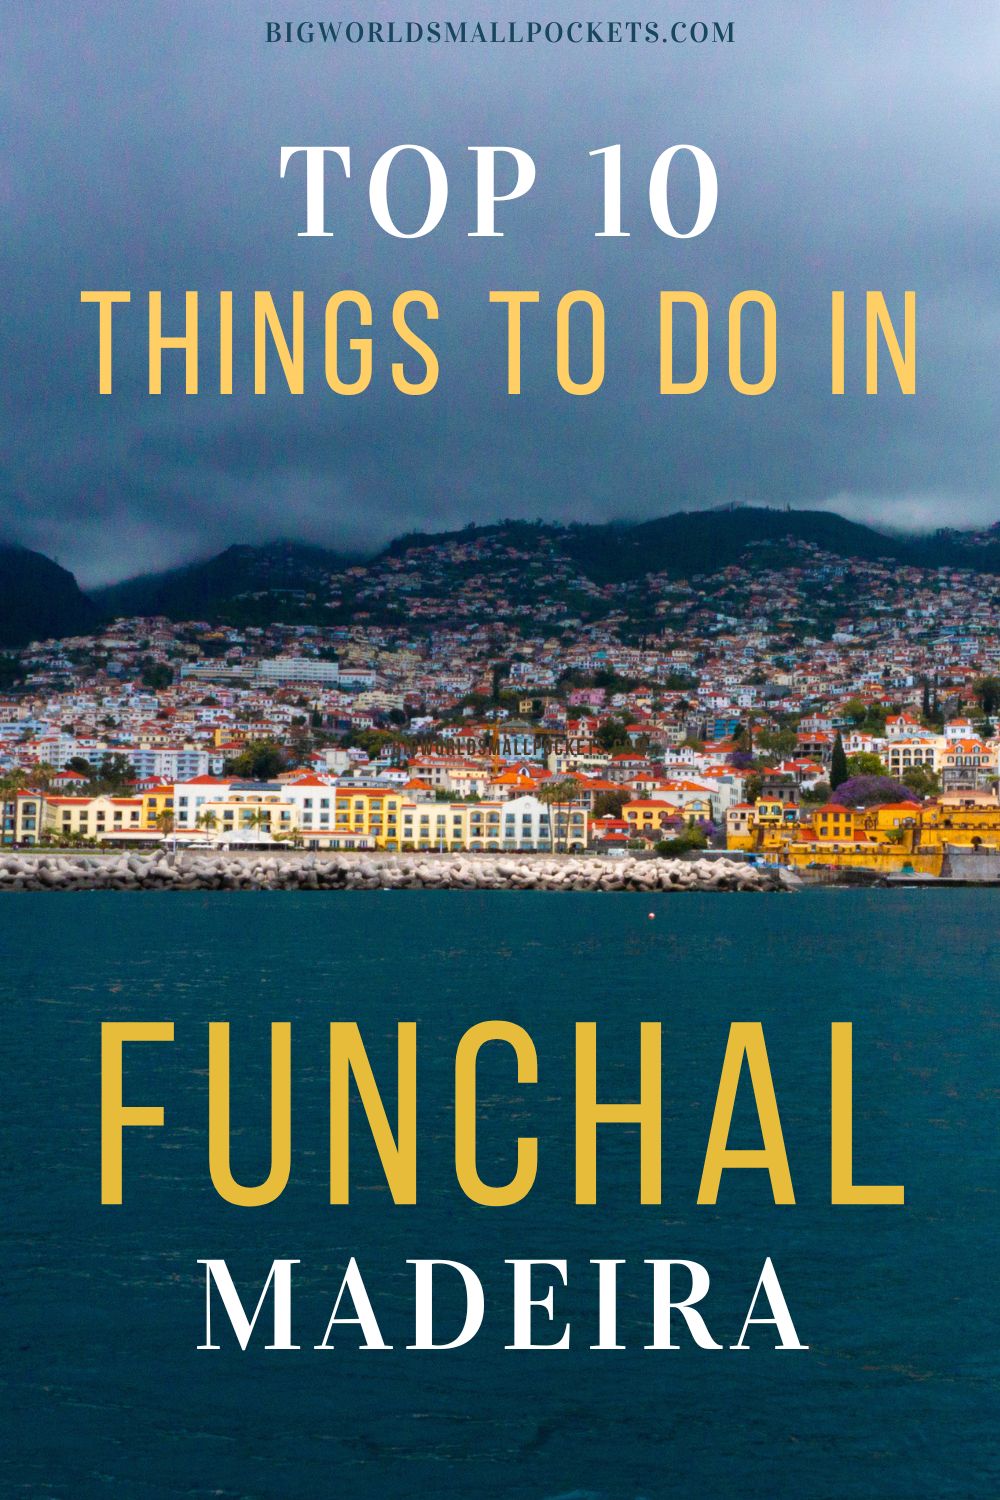 10 Best Things to Do in Funchal, Madeira